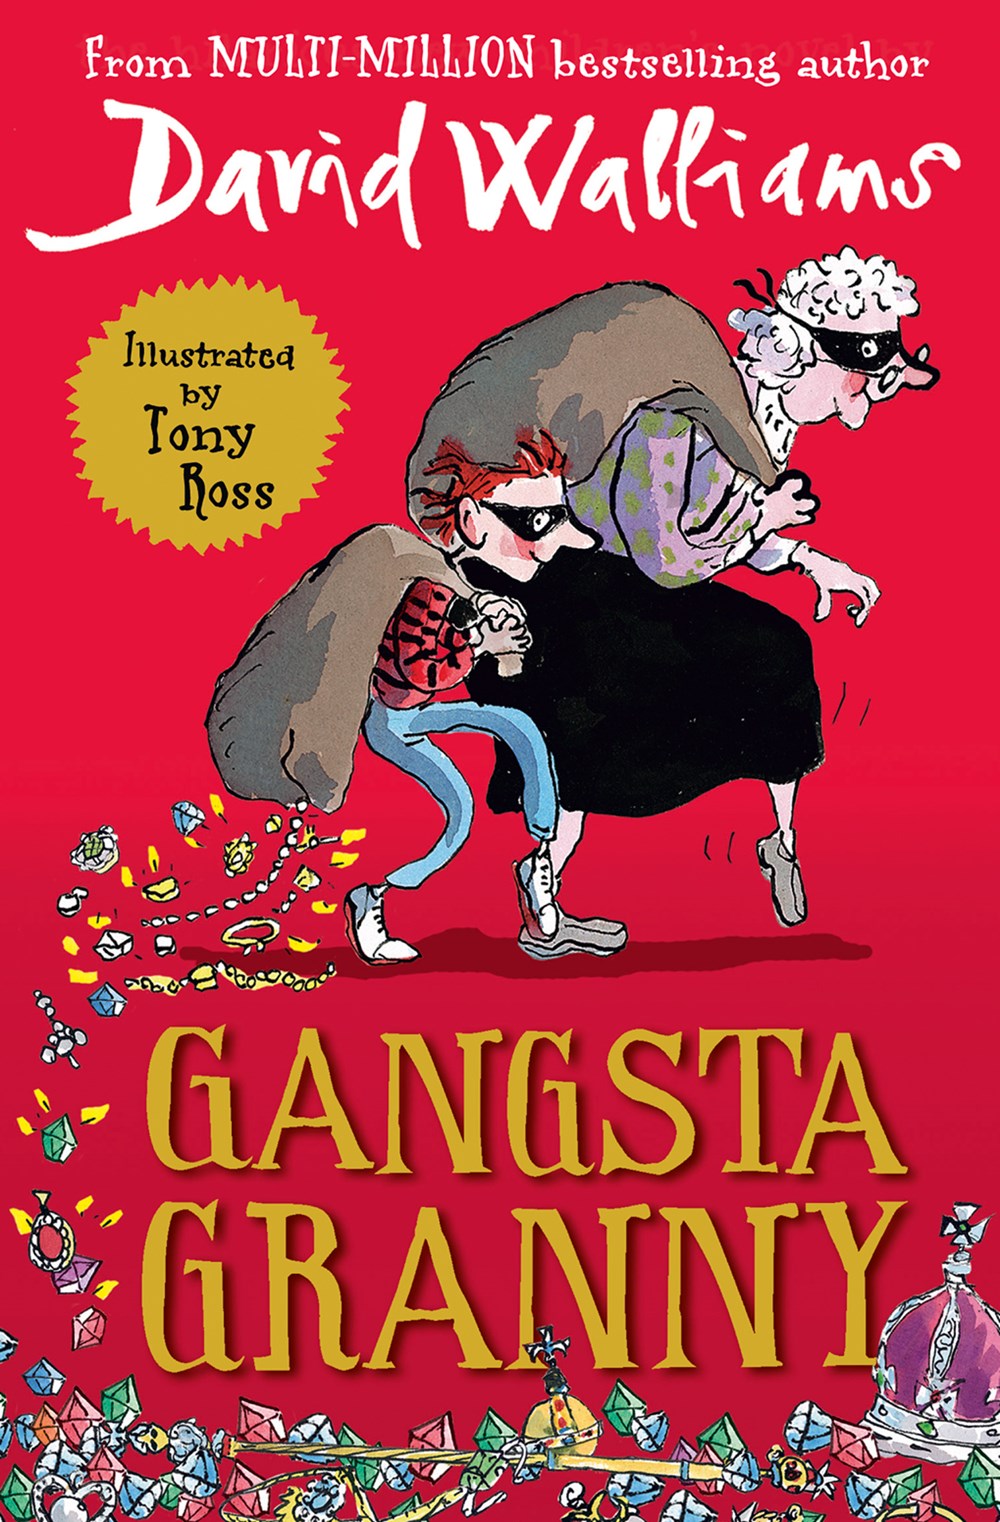 Gangsta Granny (Limited 10th Anniversary Edition of David Walliams’ Bestselling Children’s Book )